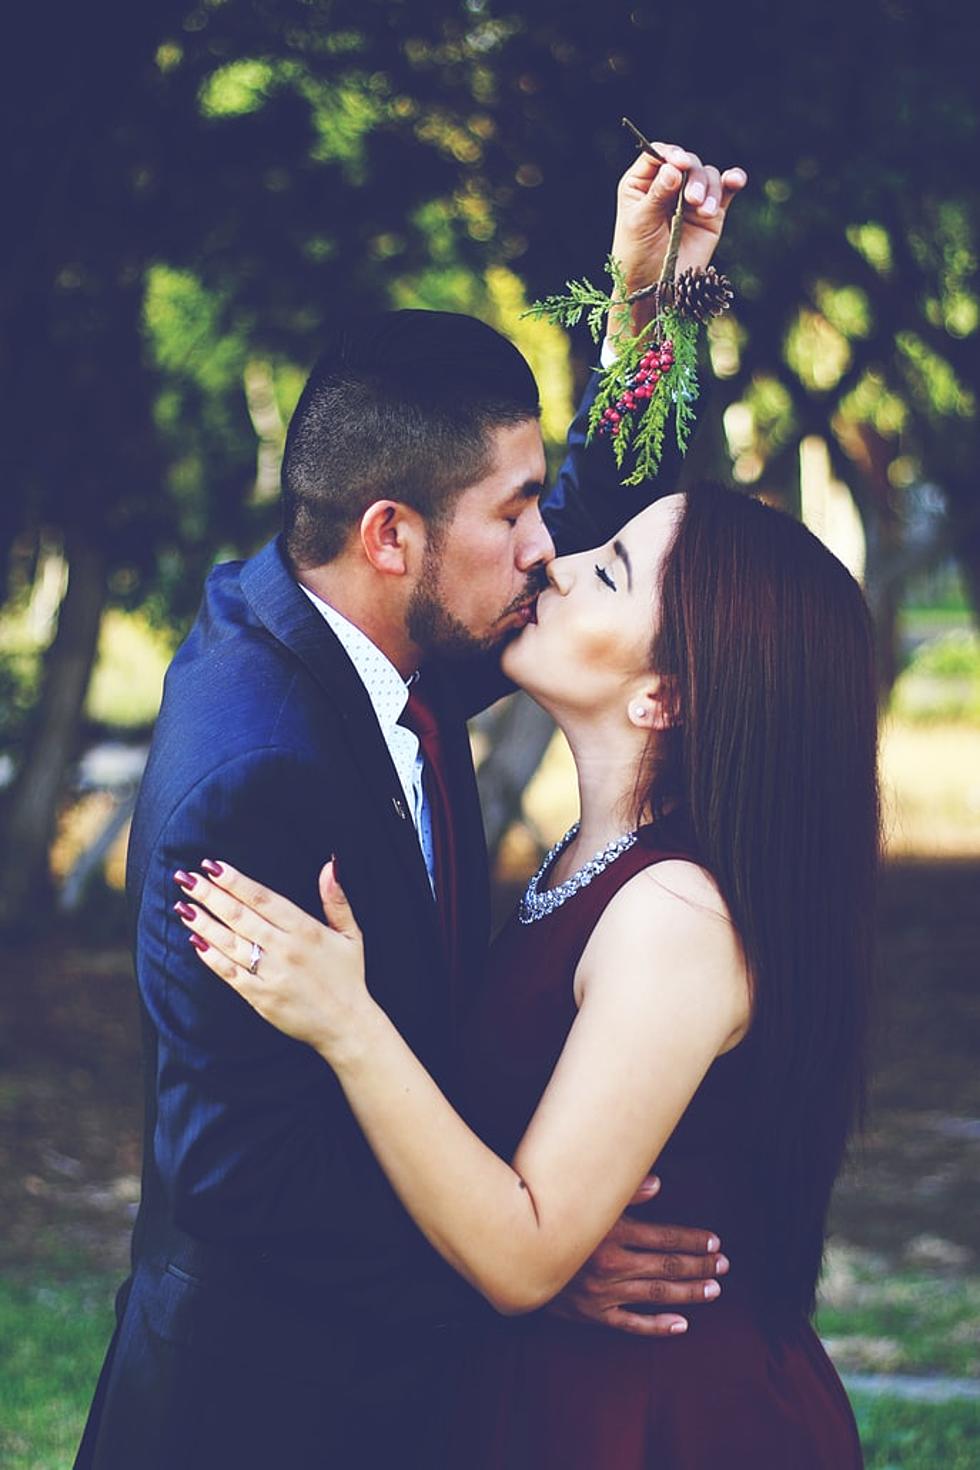 Kissing Under Mistletoe Meaning a bit Different Than We Knew